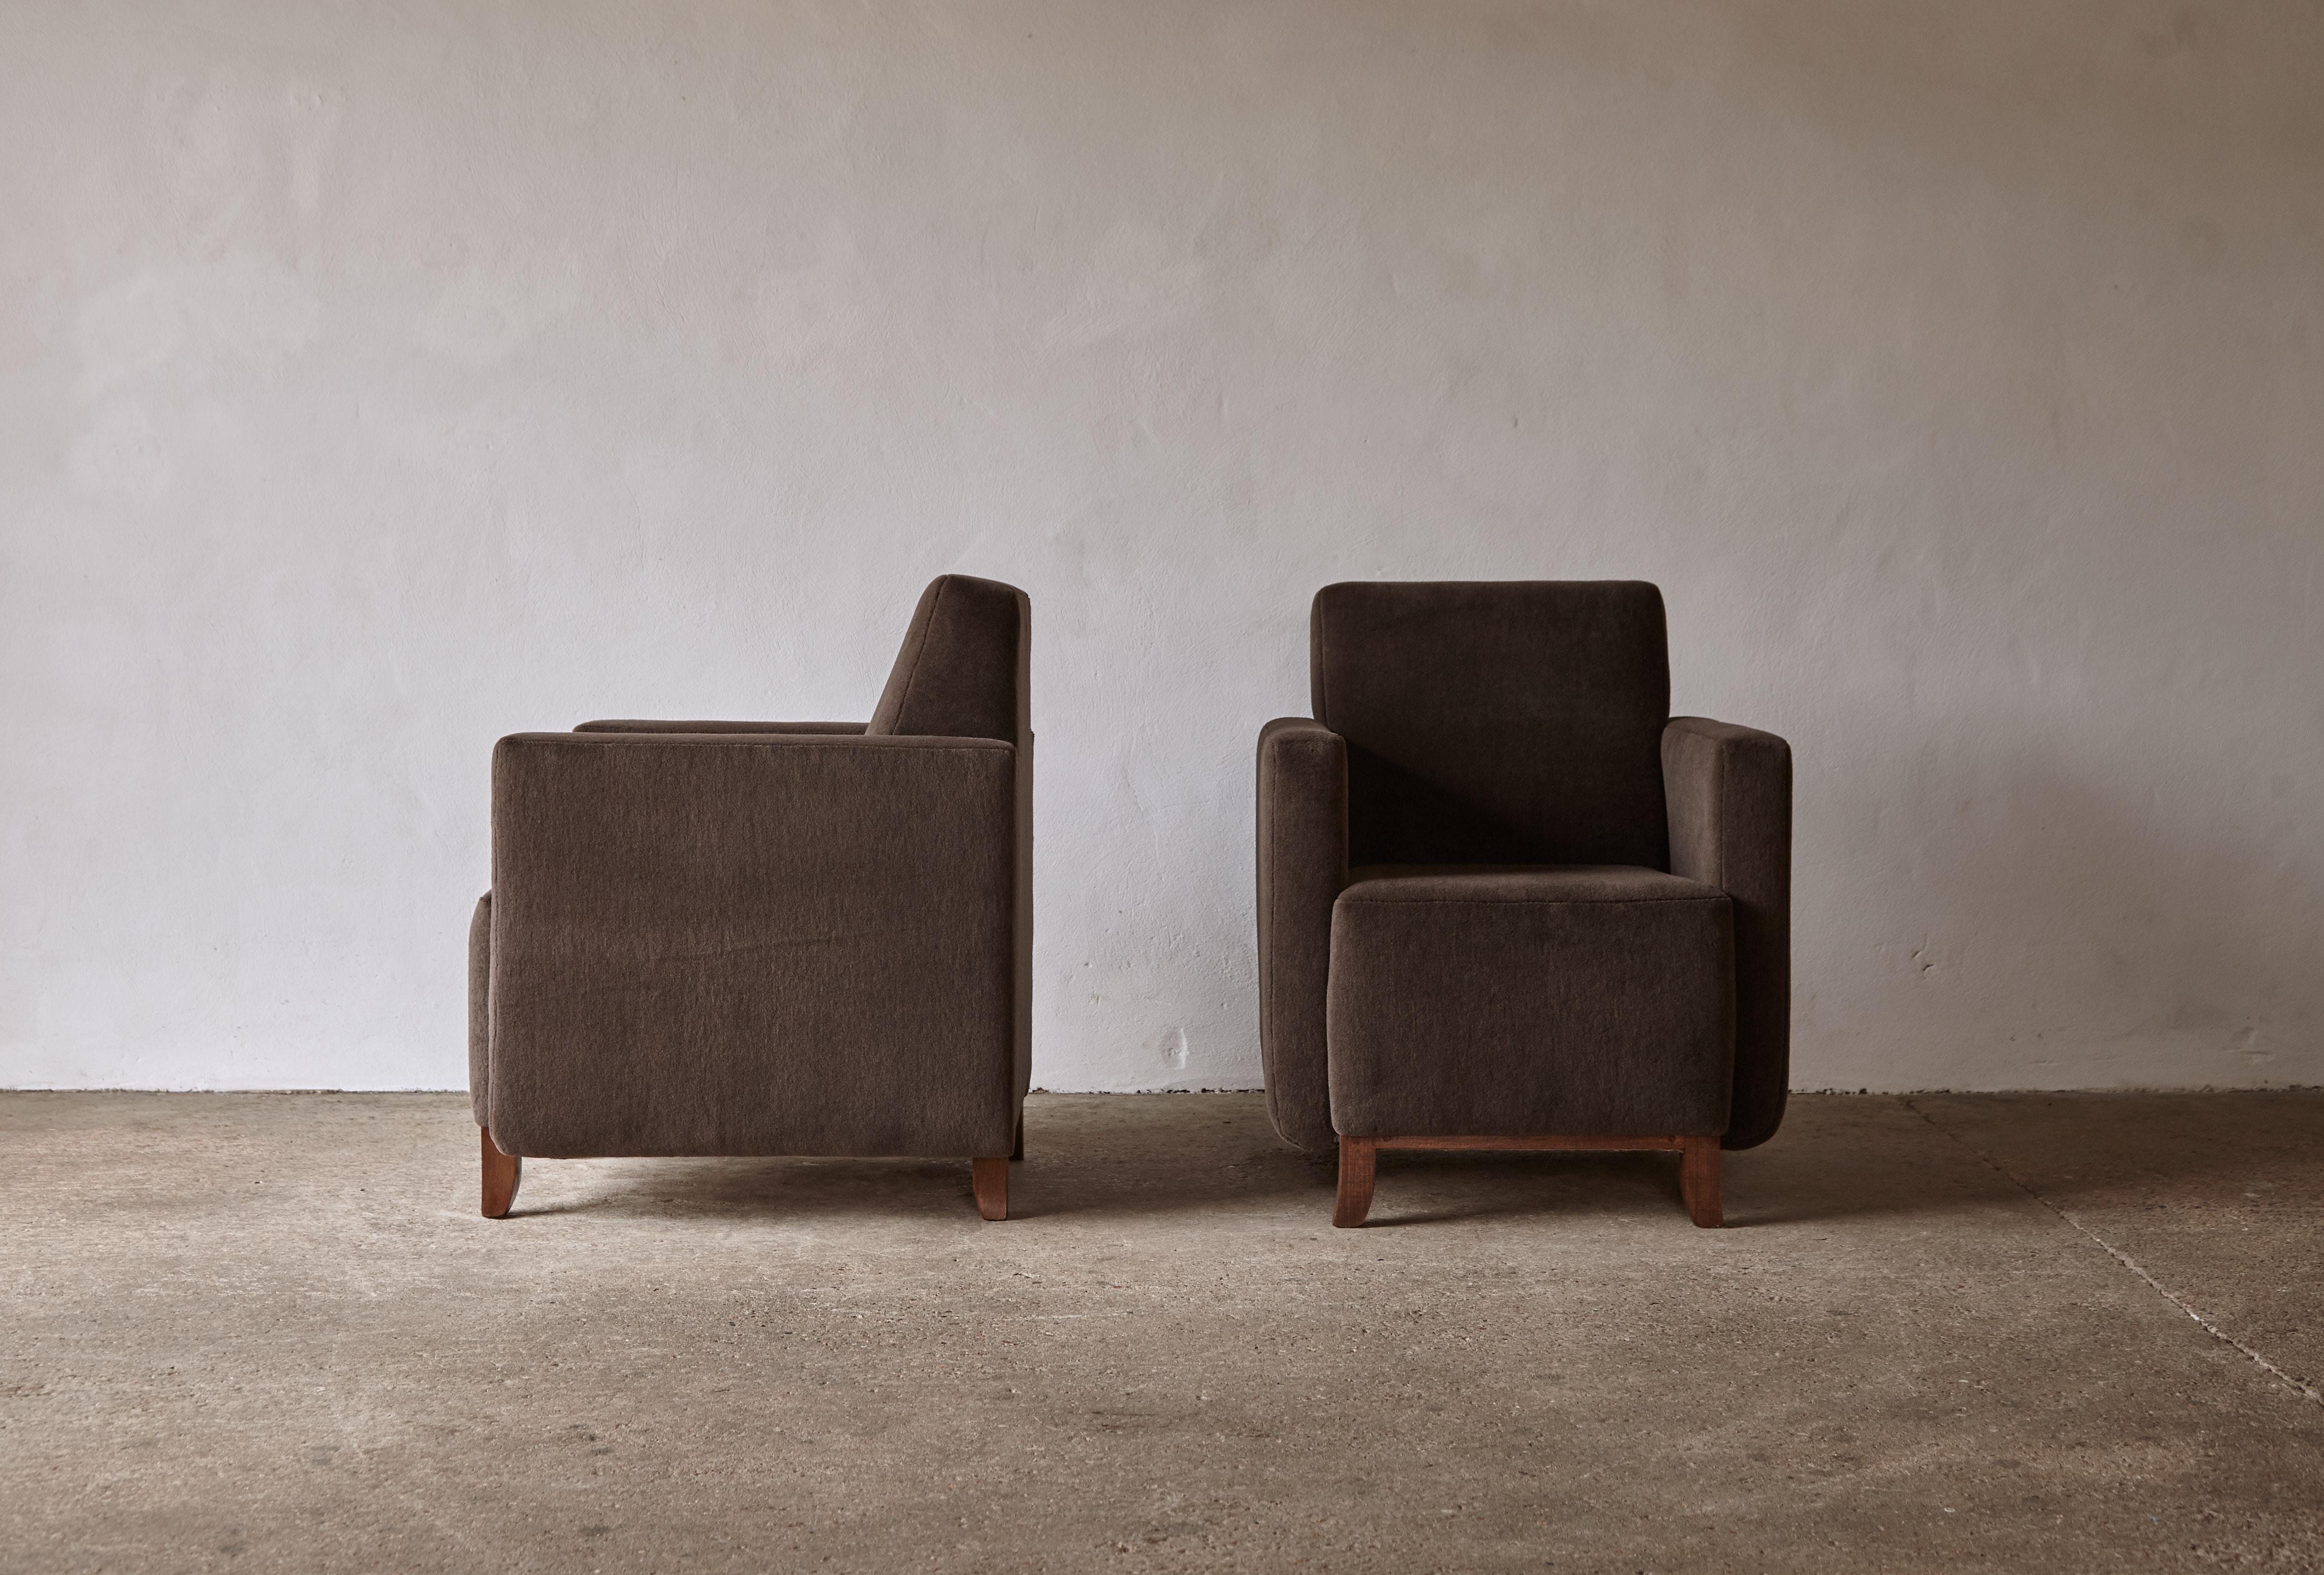 British Pair of Square Armed Club Chairs, Upholstered in Pure Alpaca